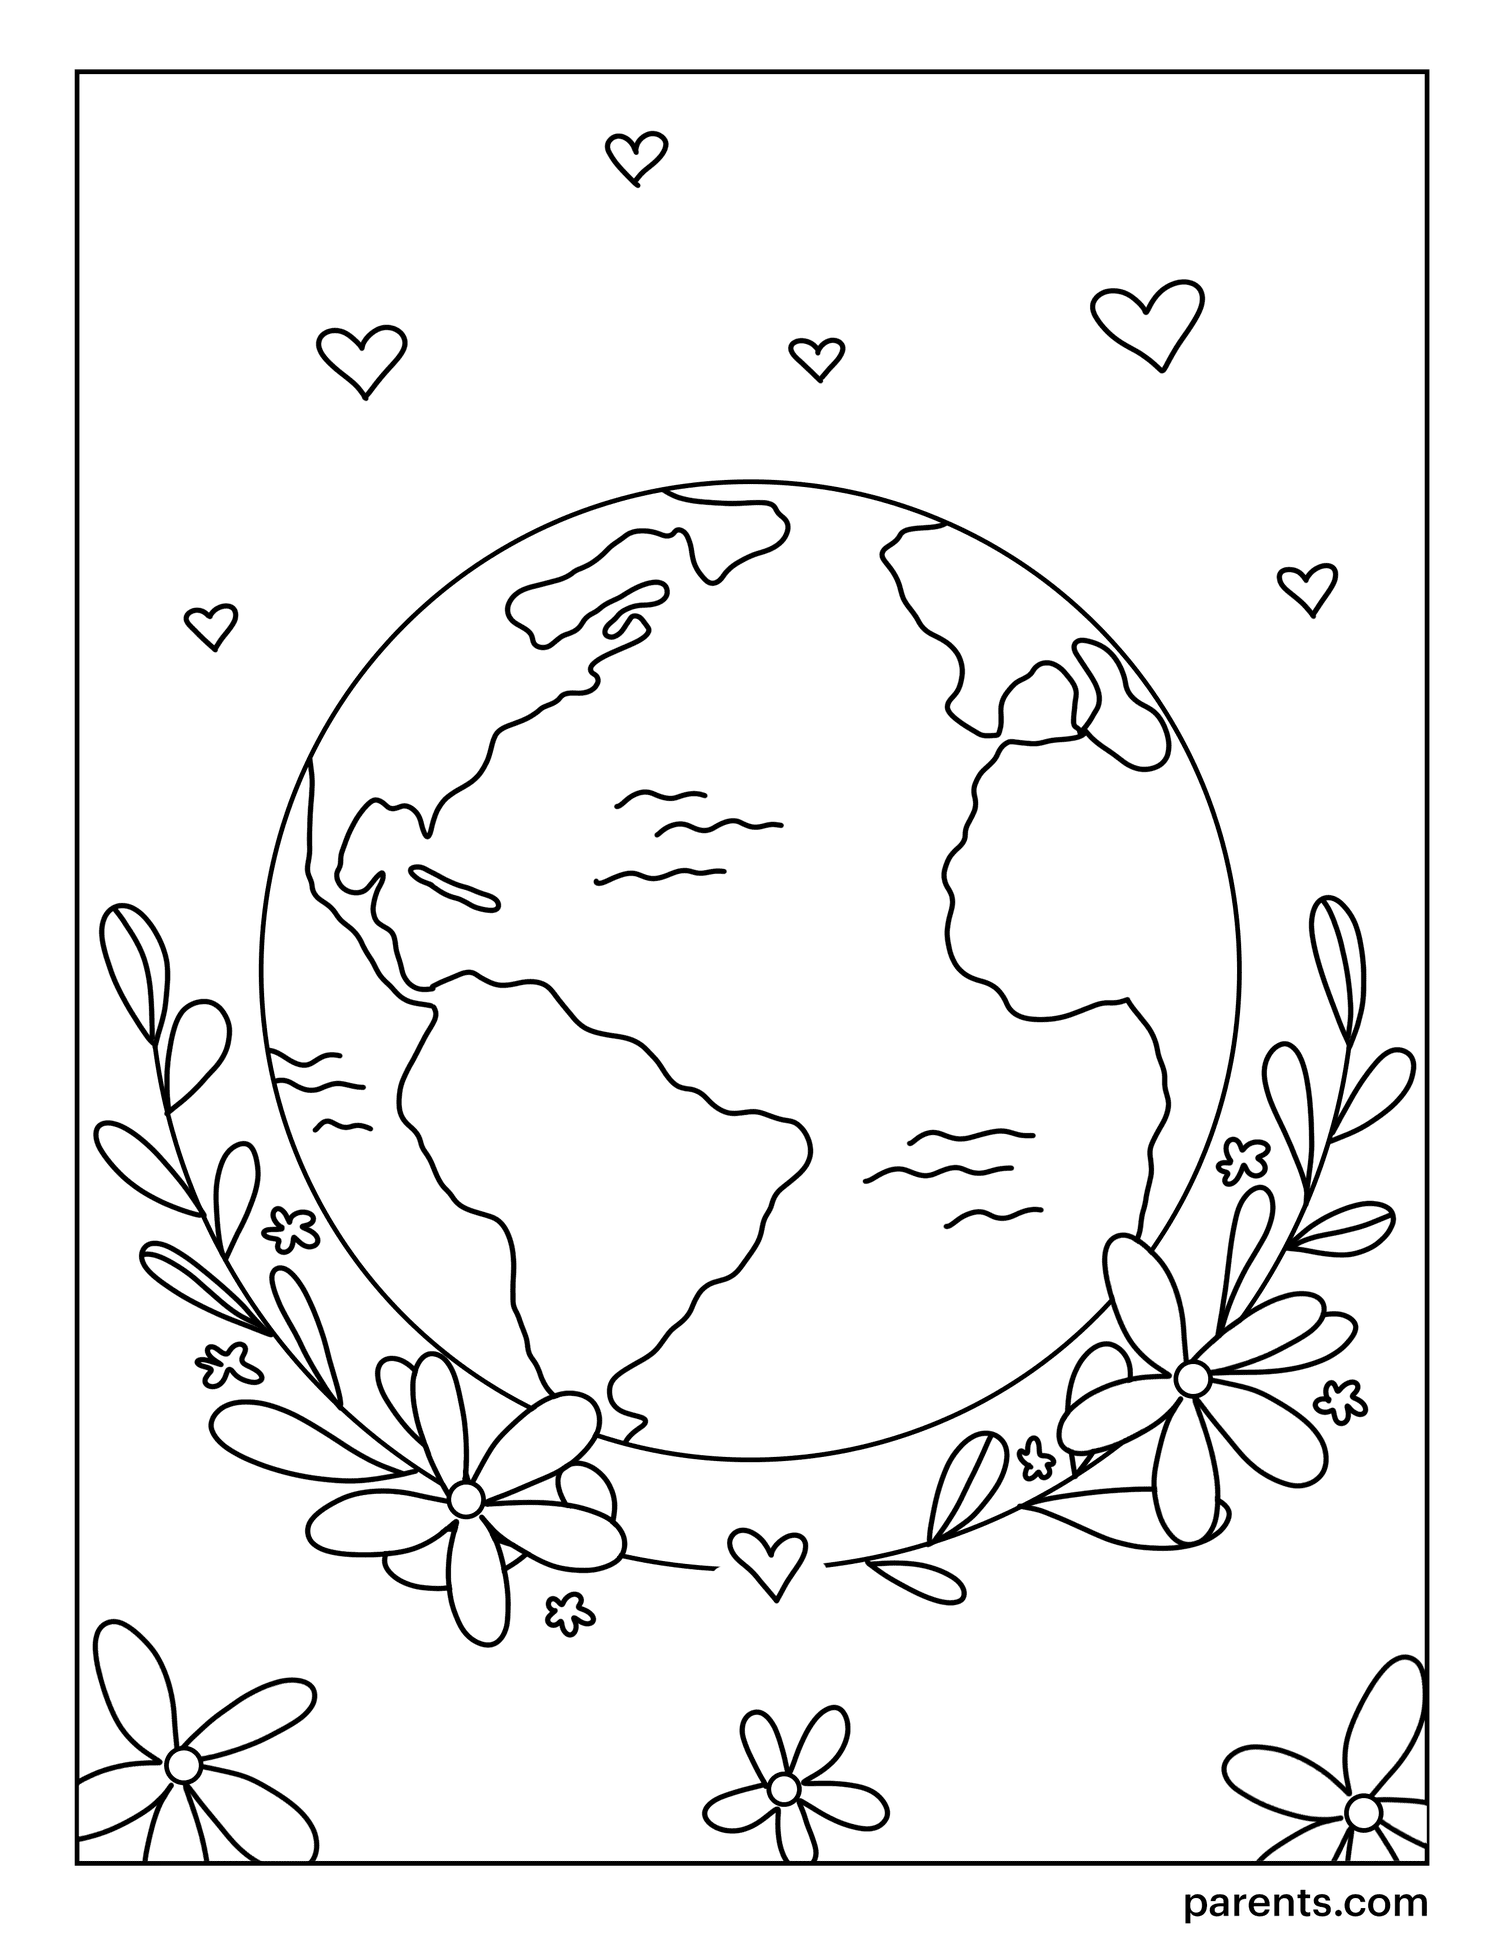 Earth Day Coloring Page